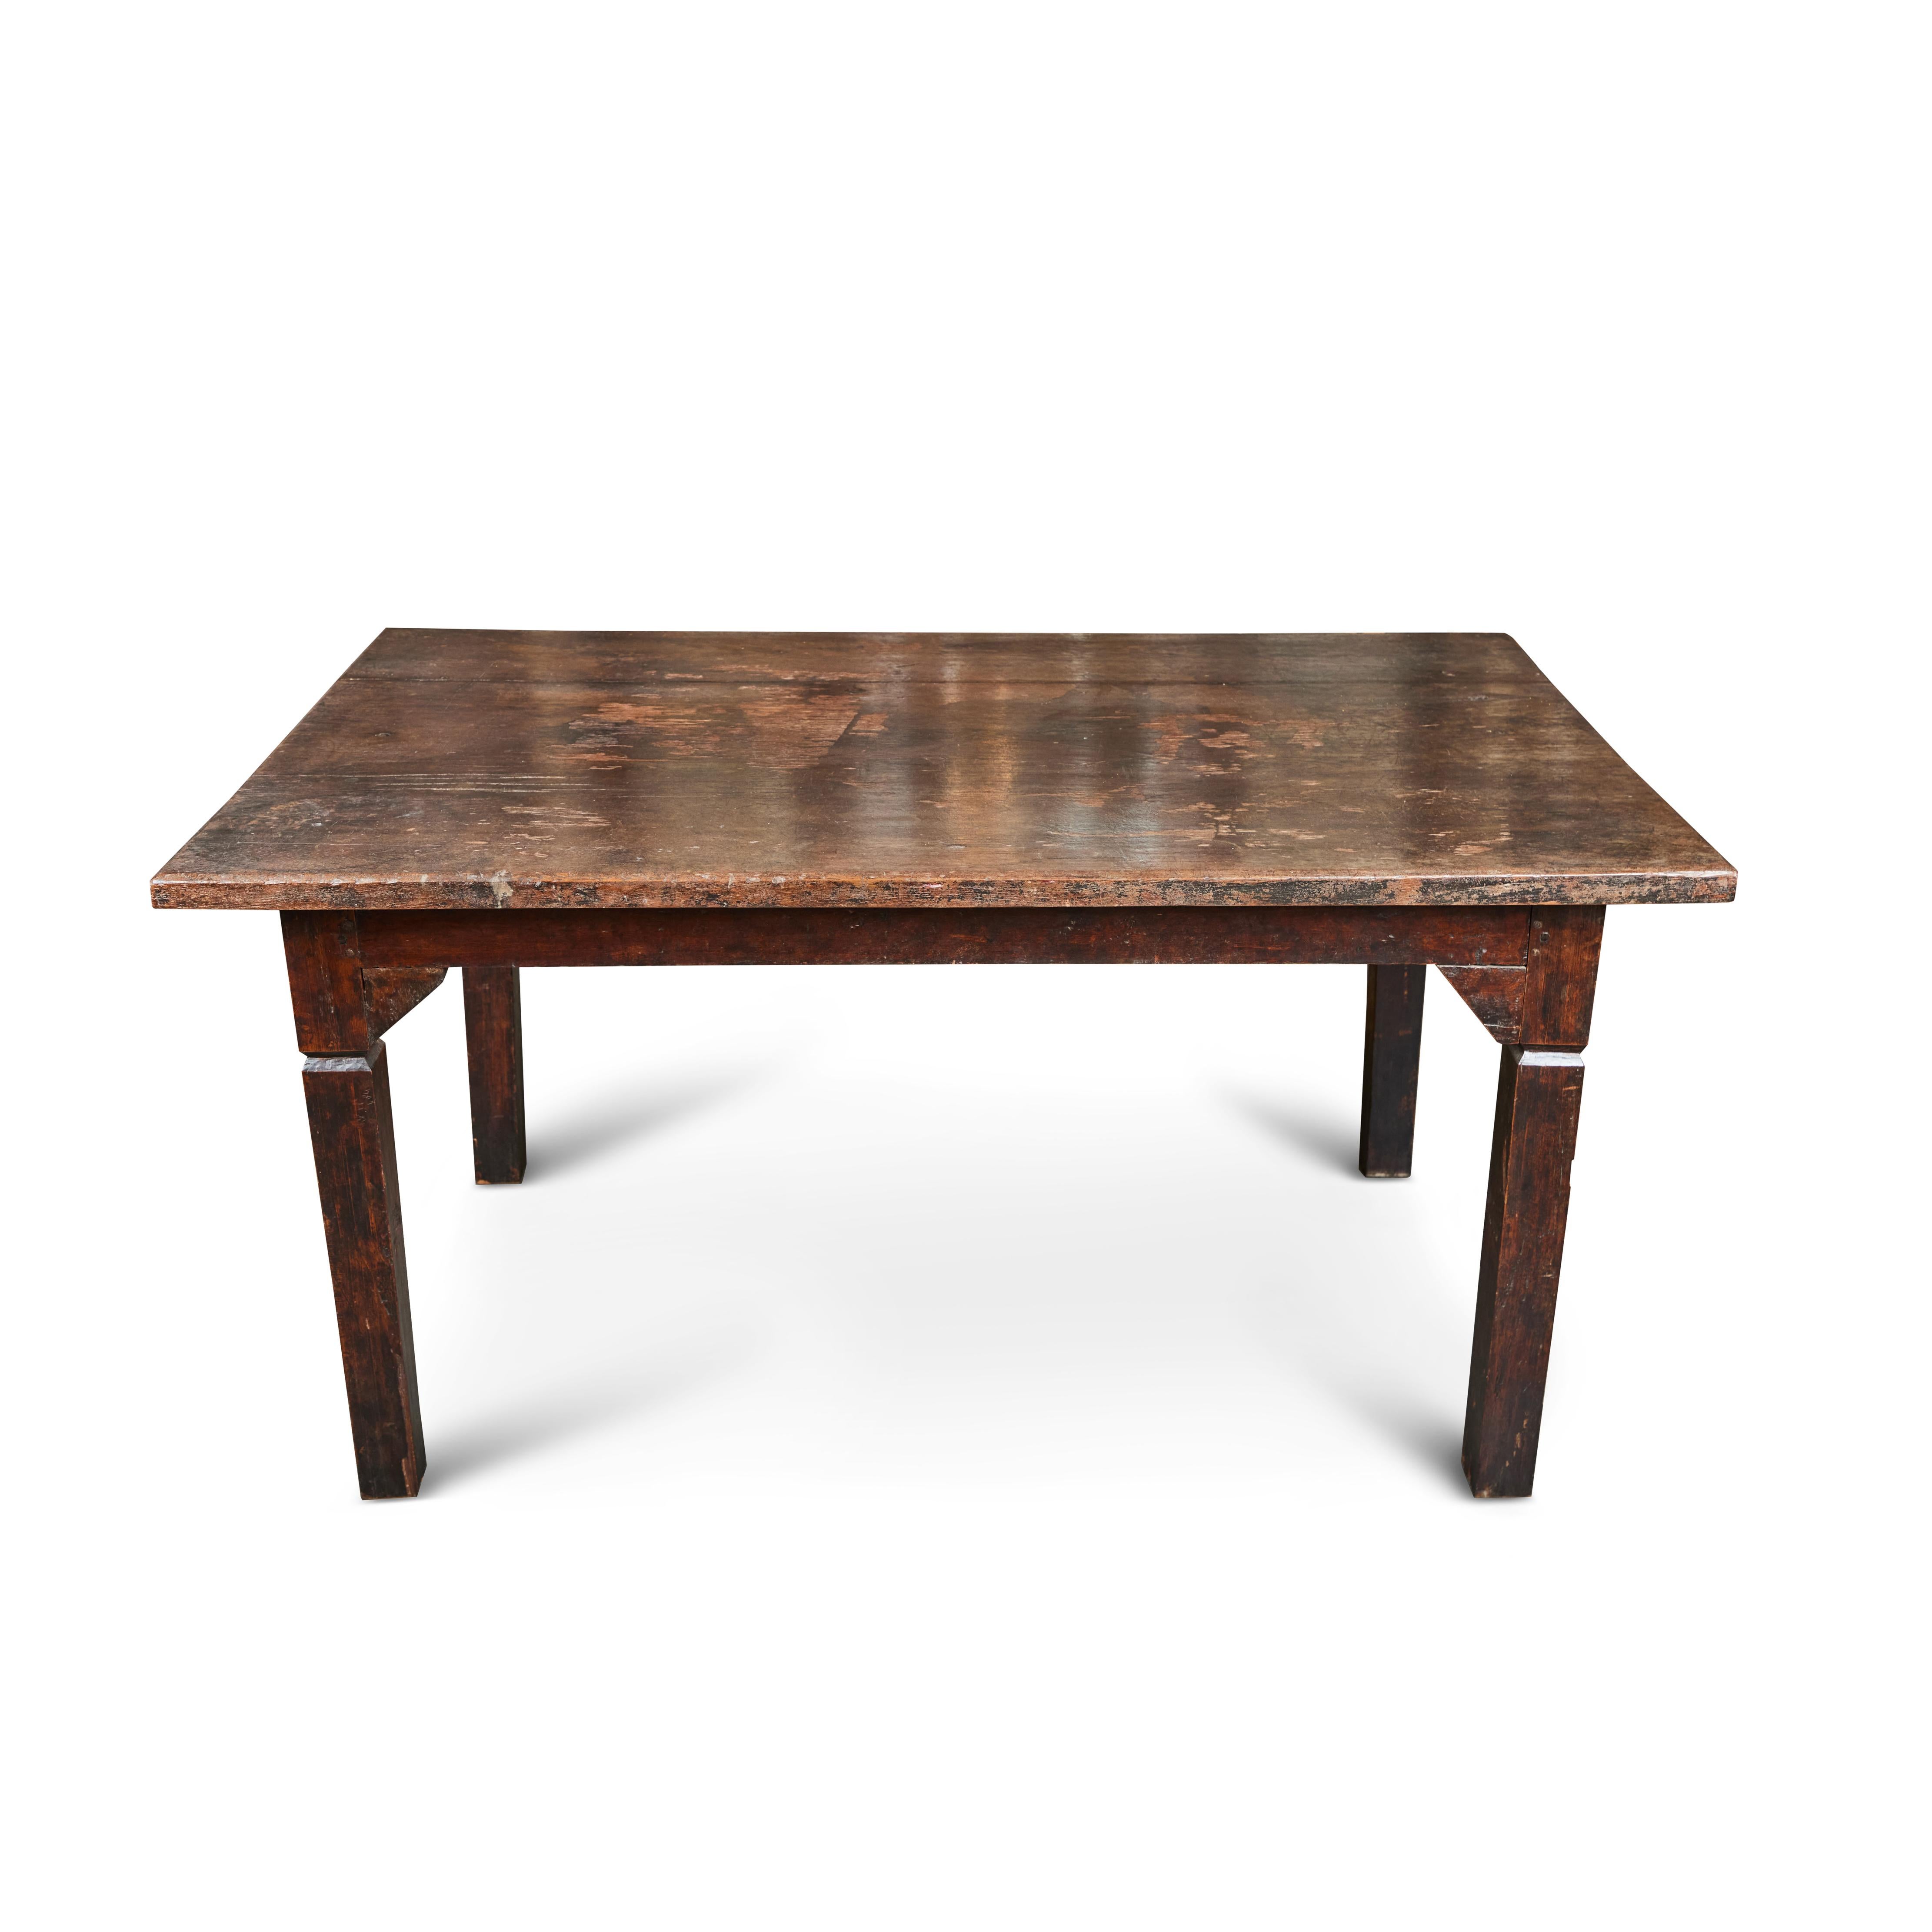 Sturdy in construction this vintage 2-plank top solid Teak wood table from Burma is the perfect centerpiece. It is generous in size with simple lines and beautiful original finish. Great for a dining table or a desk / library table.

60